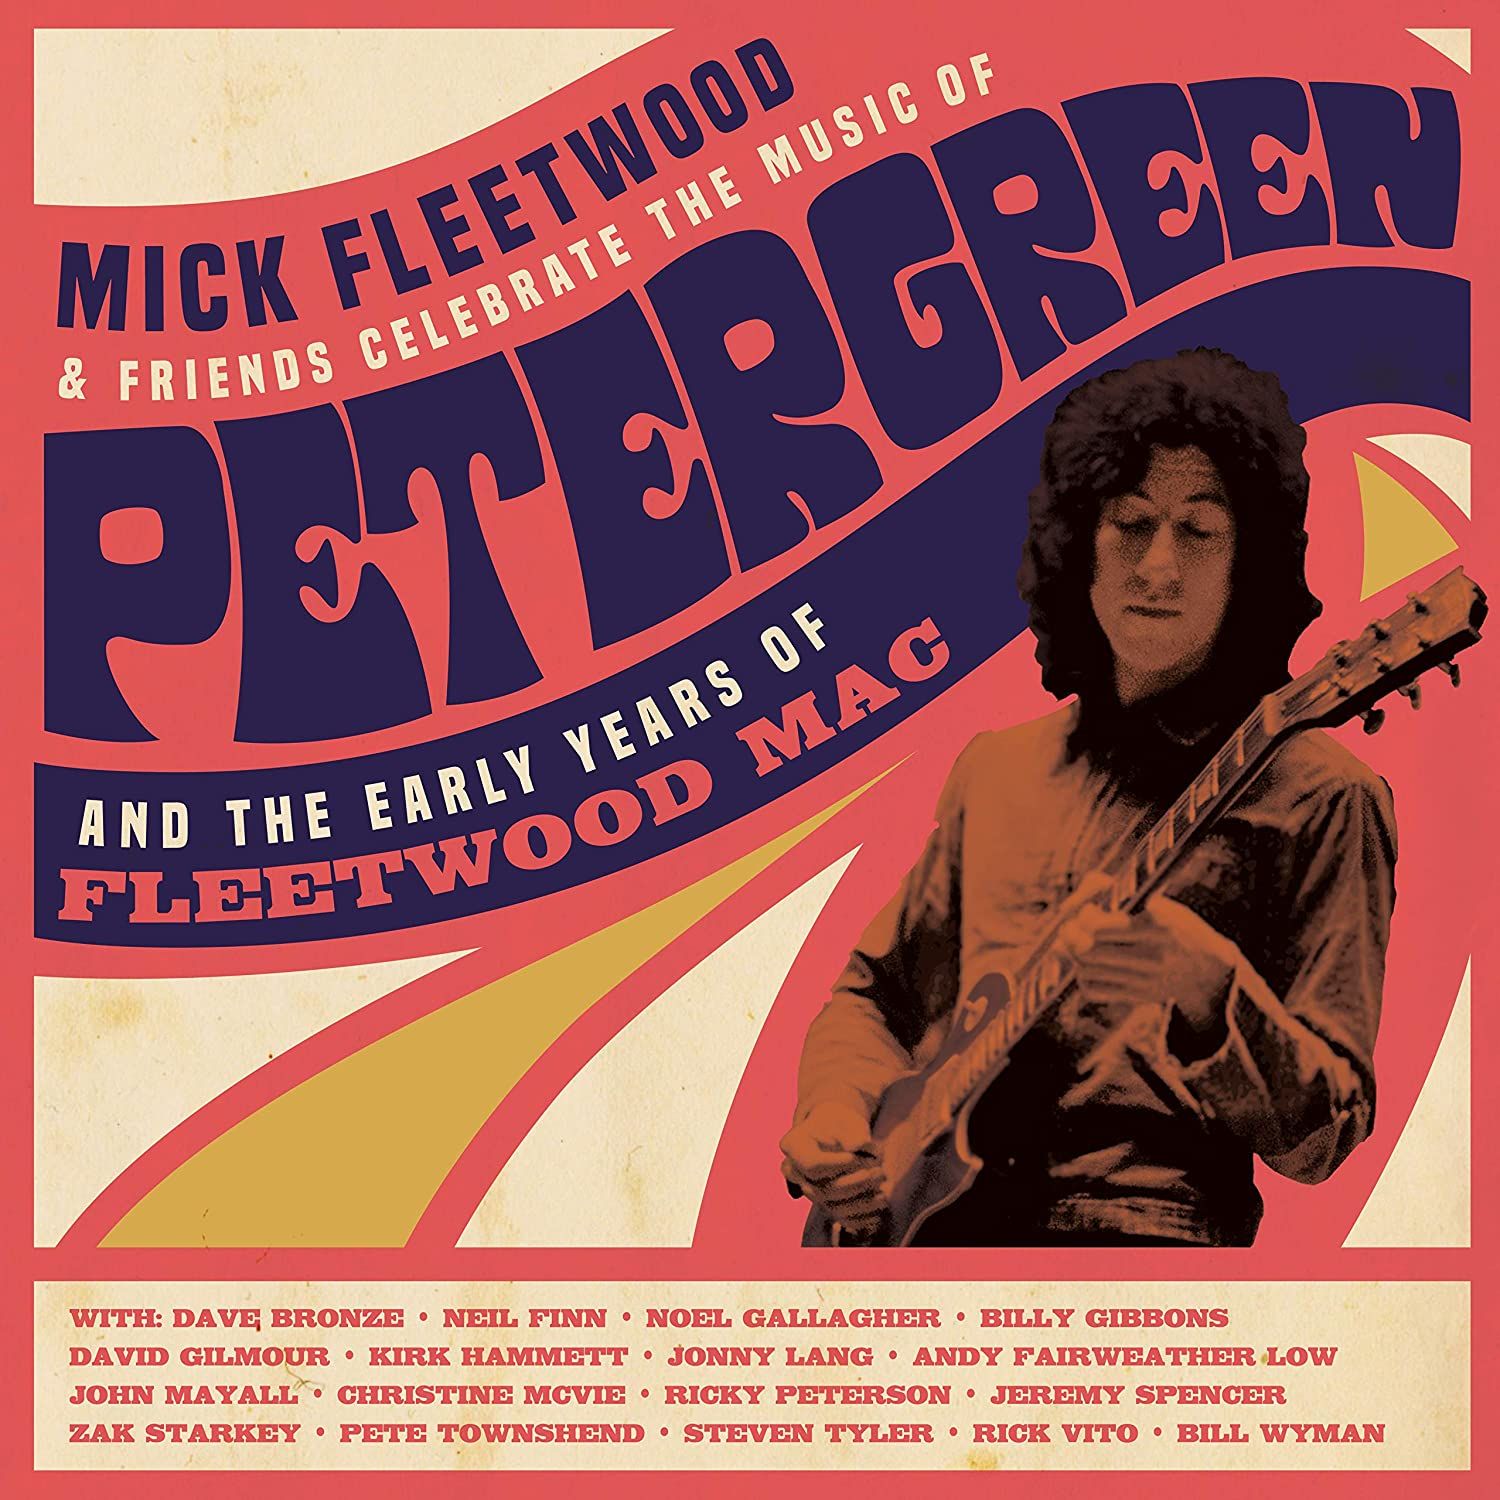 Mick Fleetwood and Friends Celebrate the Music of Peter Green and the Early Years of Fleetwood Mac: 4LP Vinyl Box Set